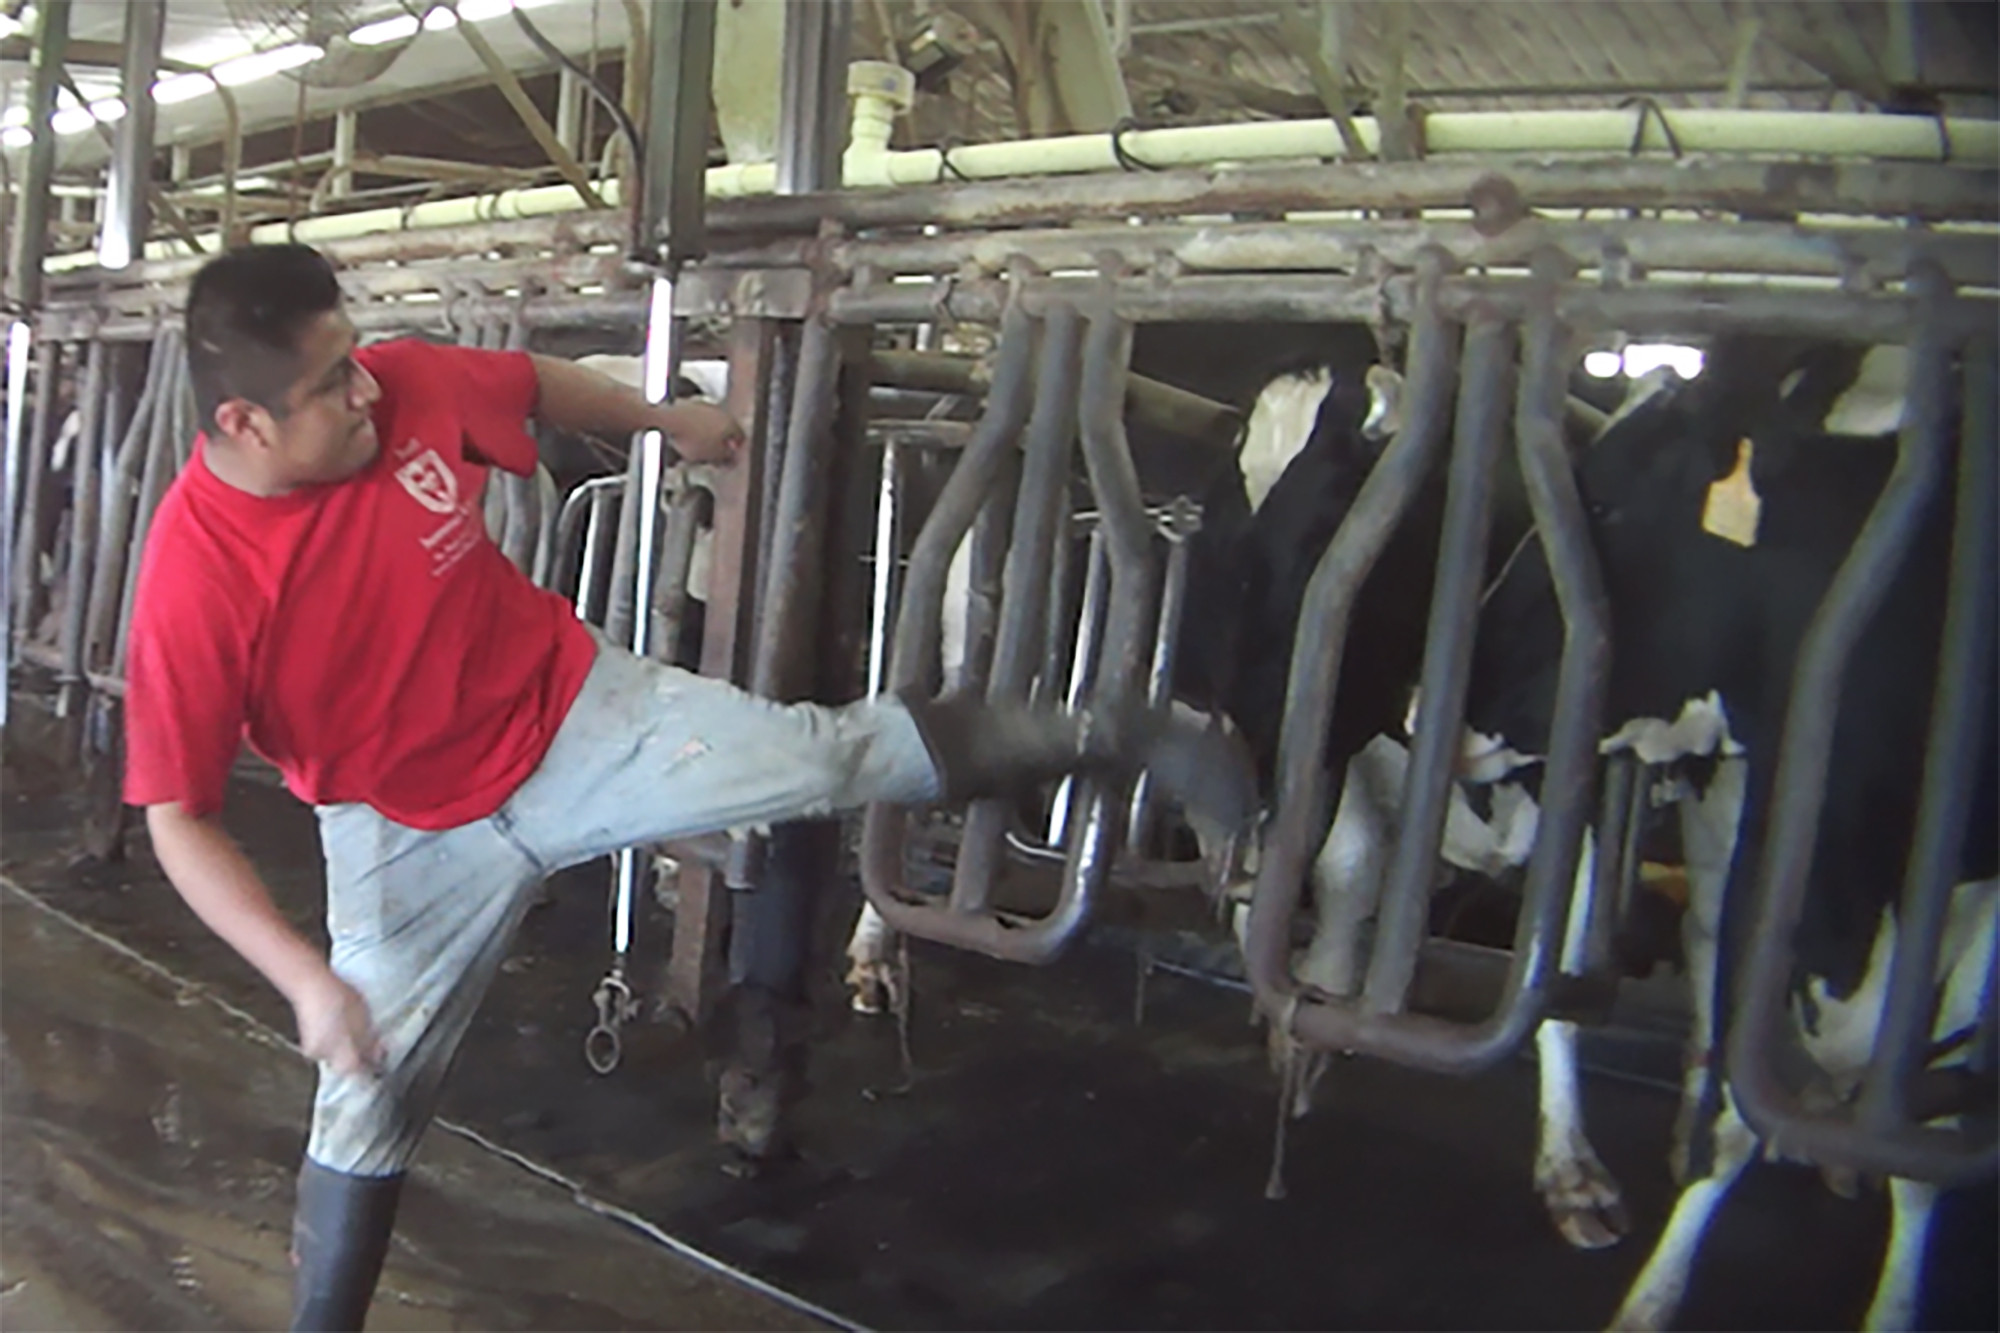 Undercover video shows shocking cow abuse